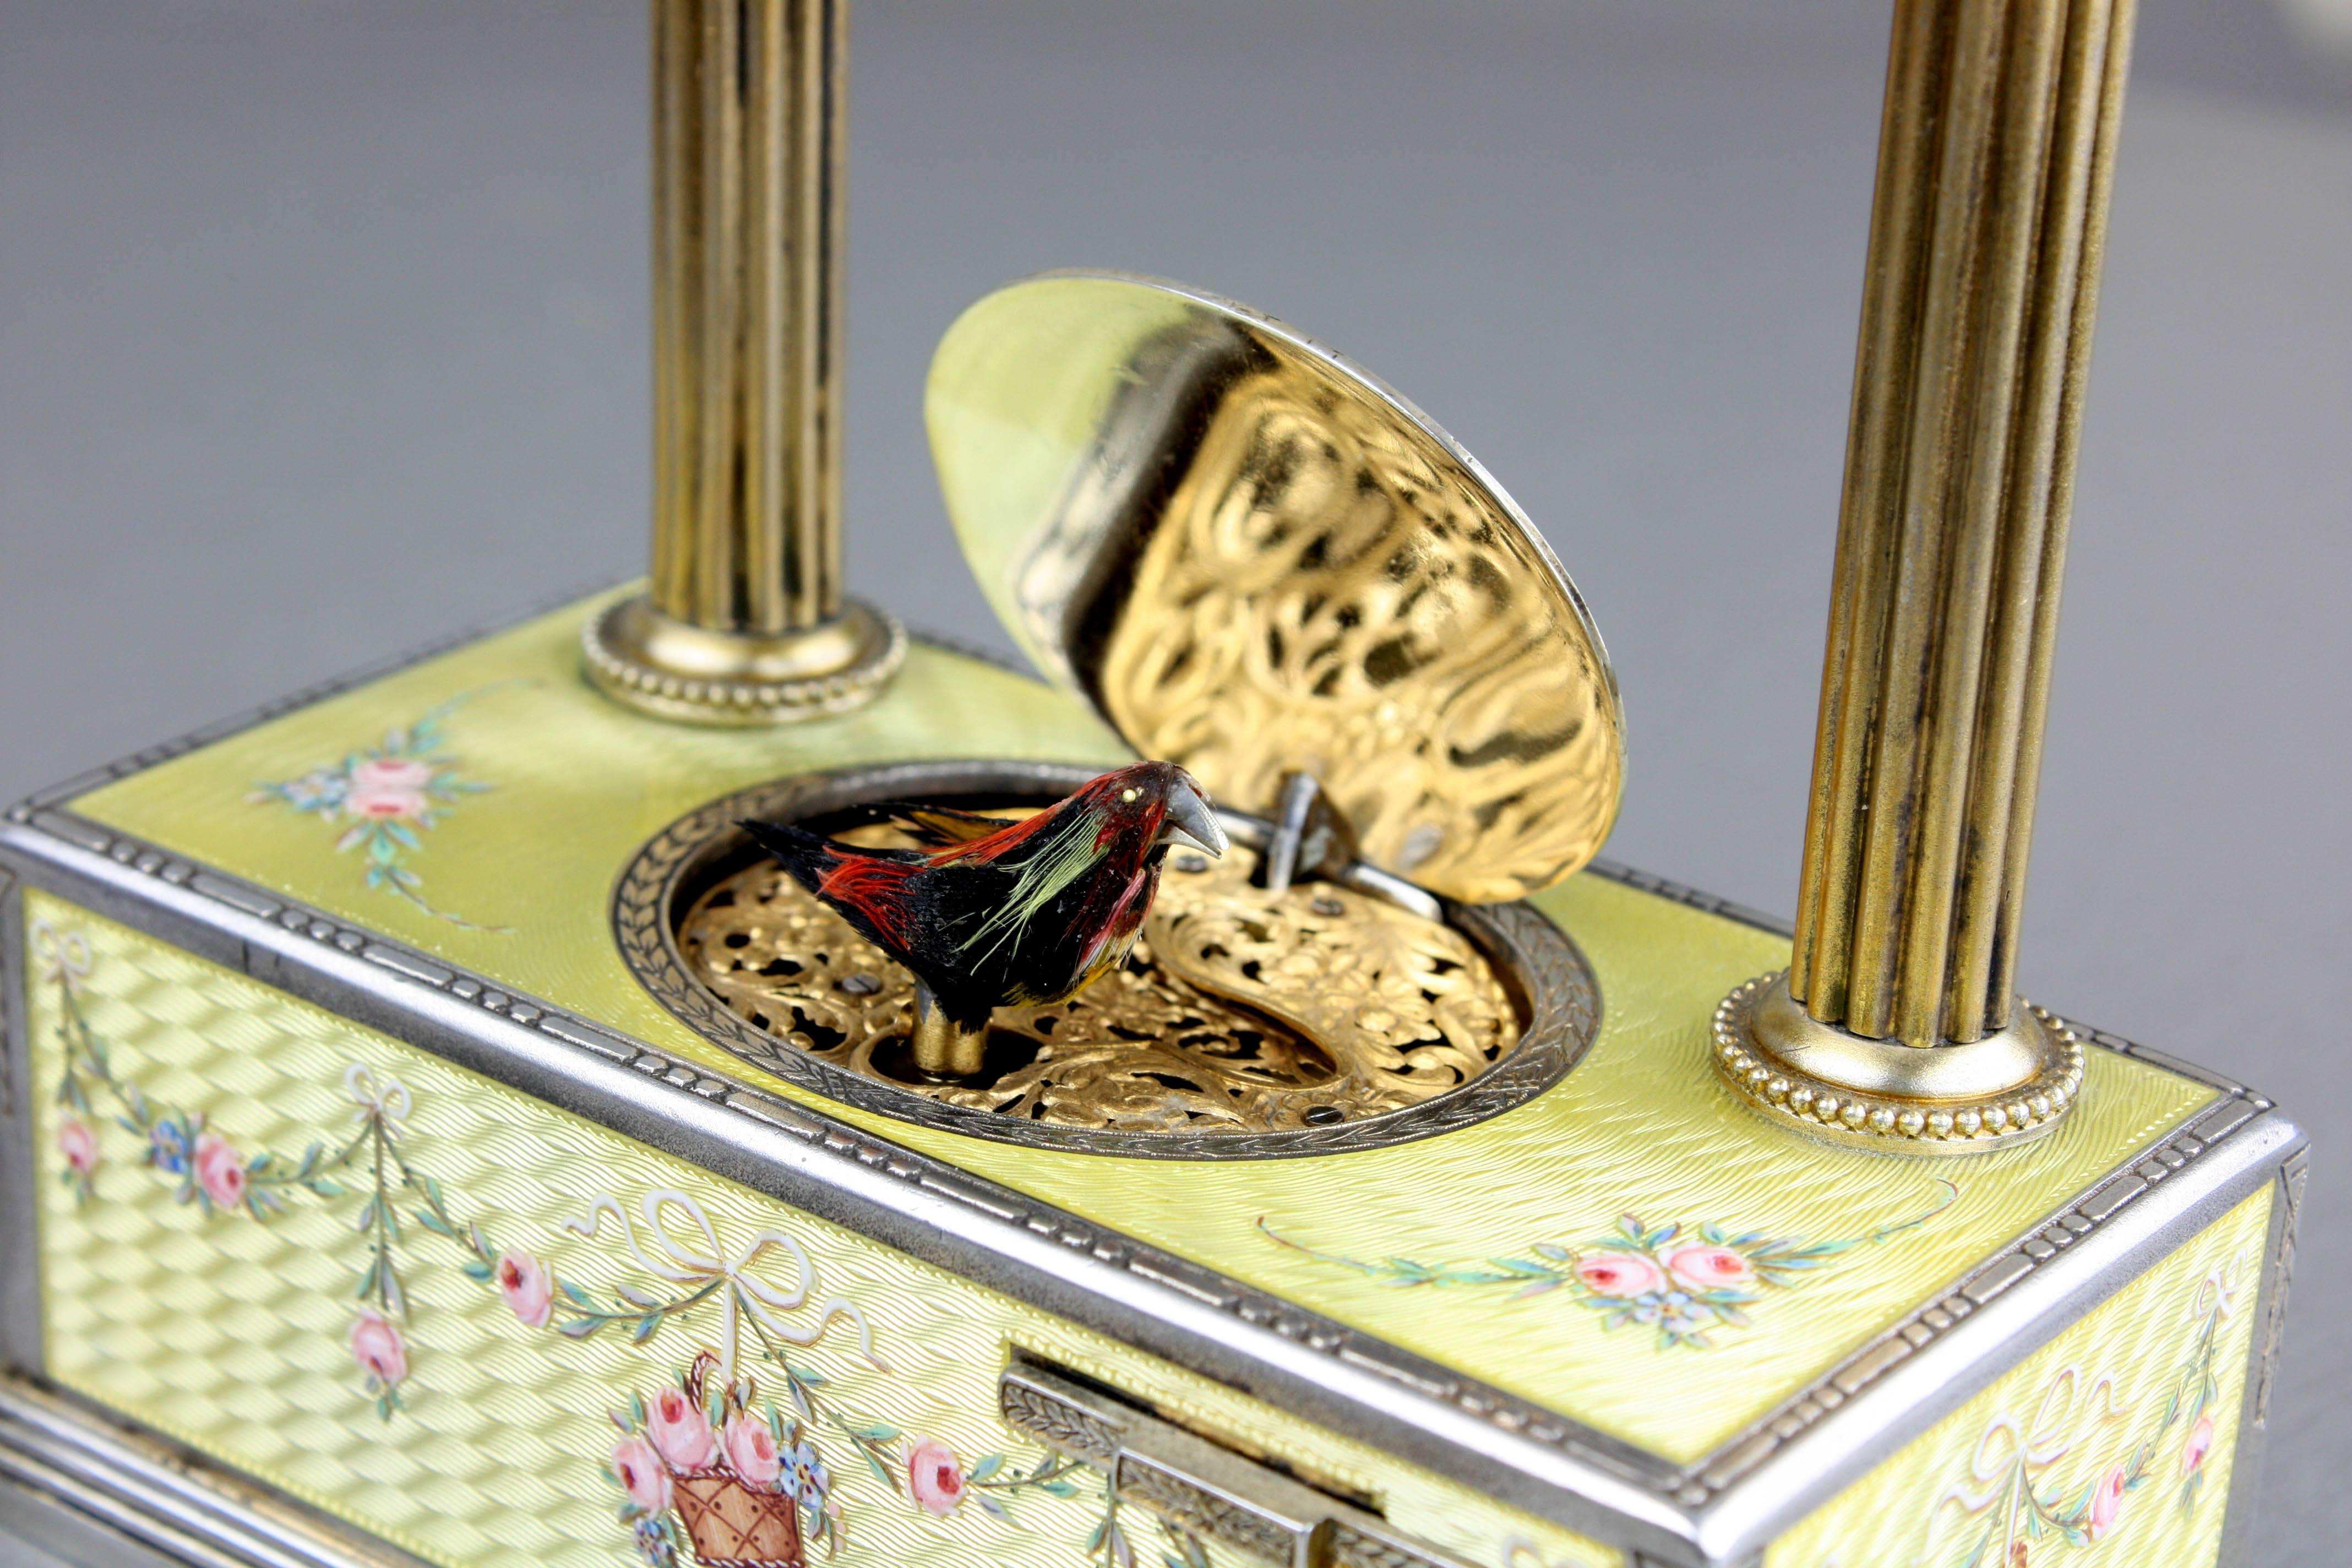 Silver Gilt and Enamel Alarm-Actuated Singing Bird Box, by C. H. Marguerat 1